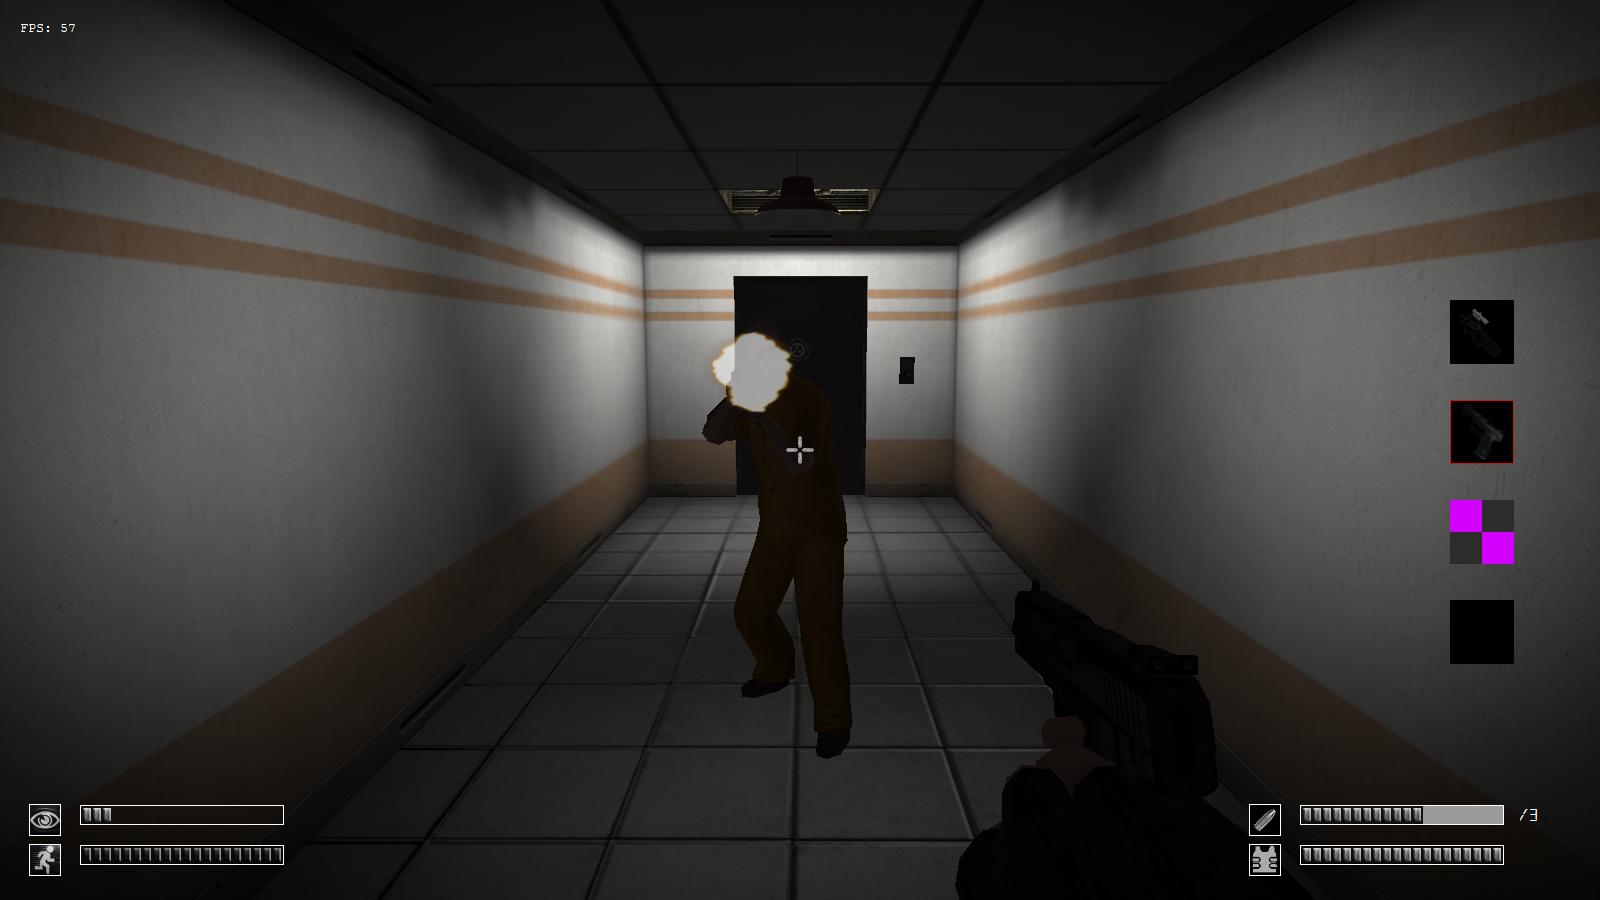 unknown image - SCP - Containment Breach Multiplayer Mod - ModDB